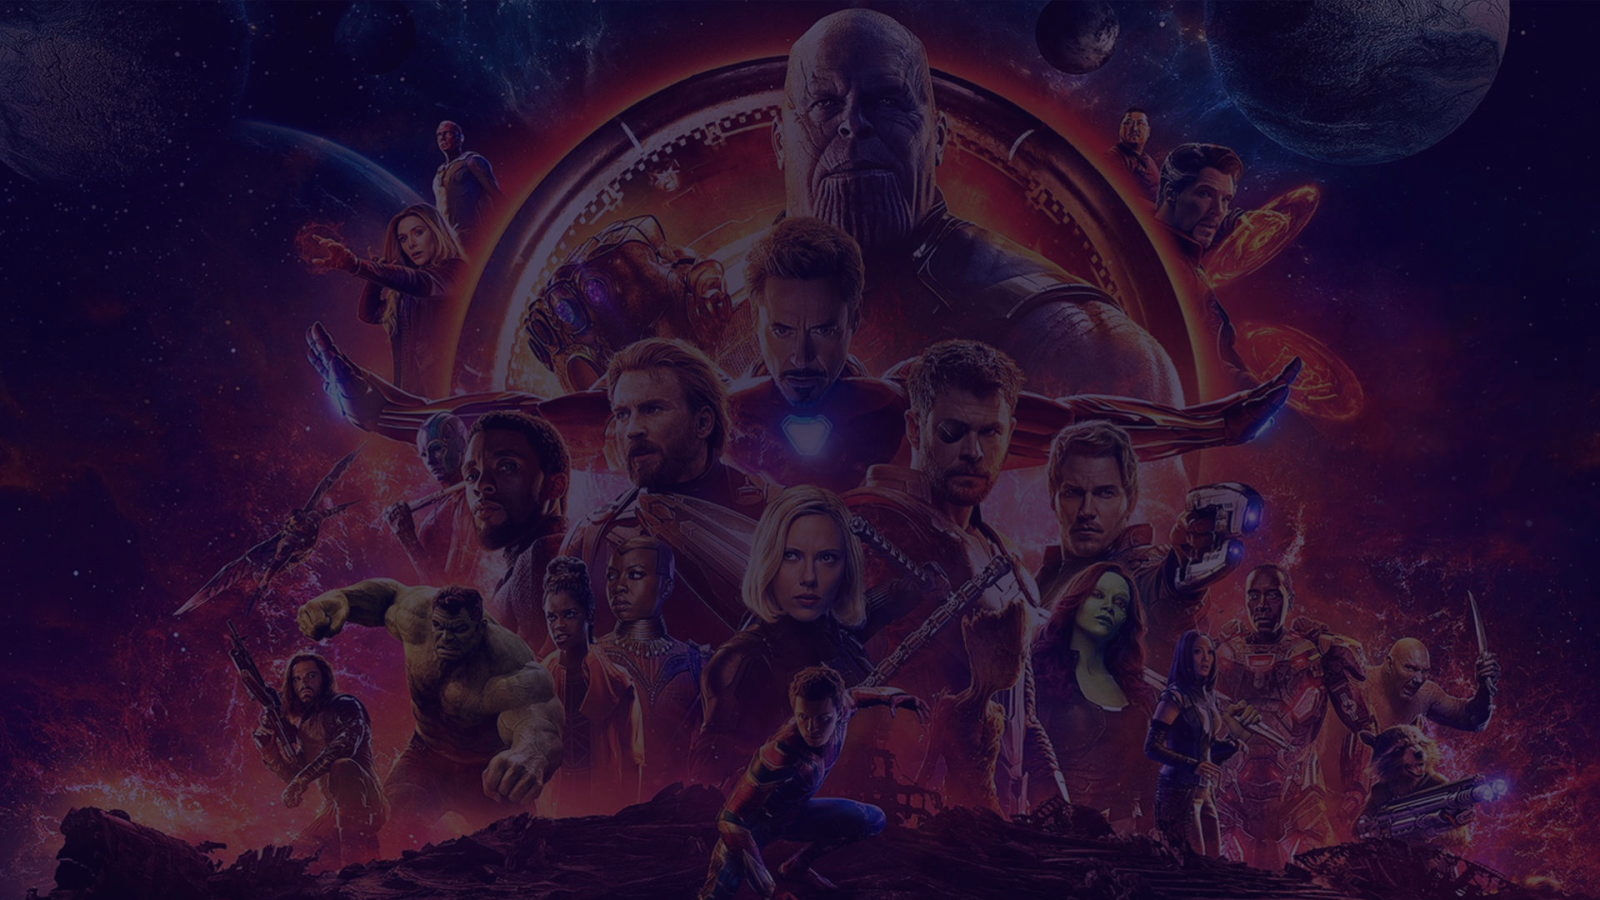 Event: Avengers Movie Premiere At Rosemont Theater